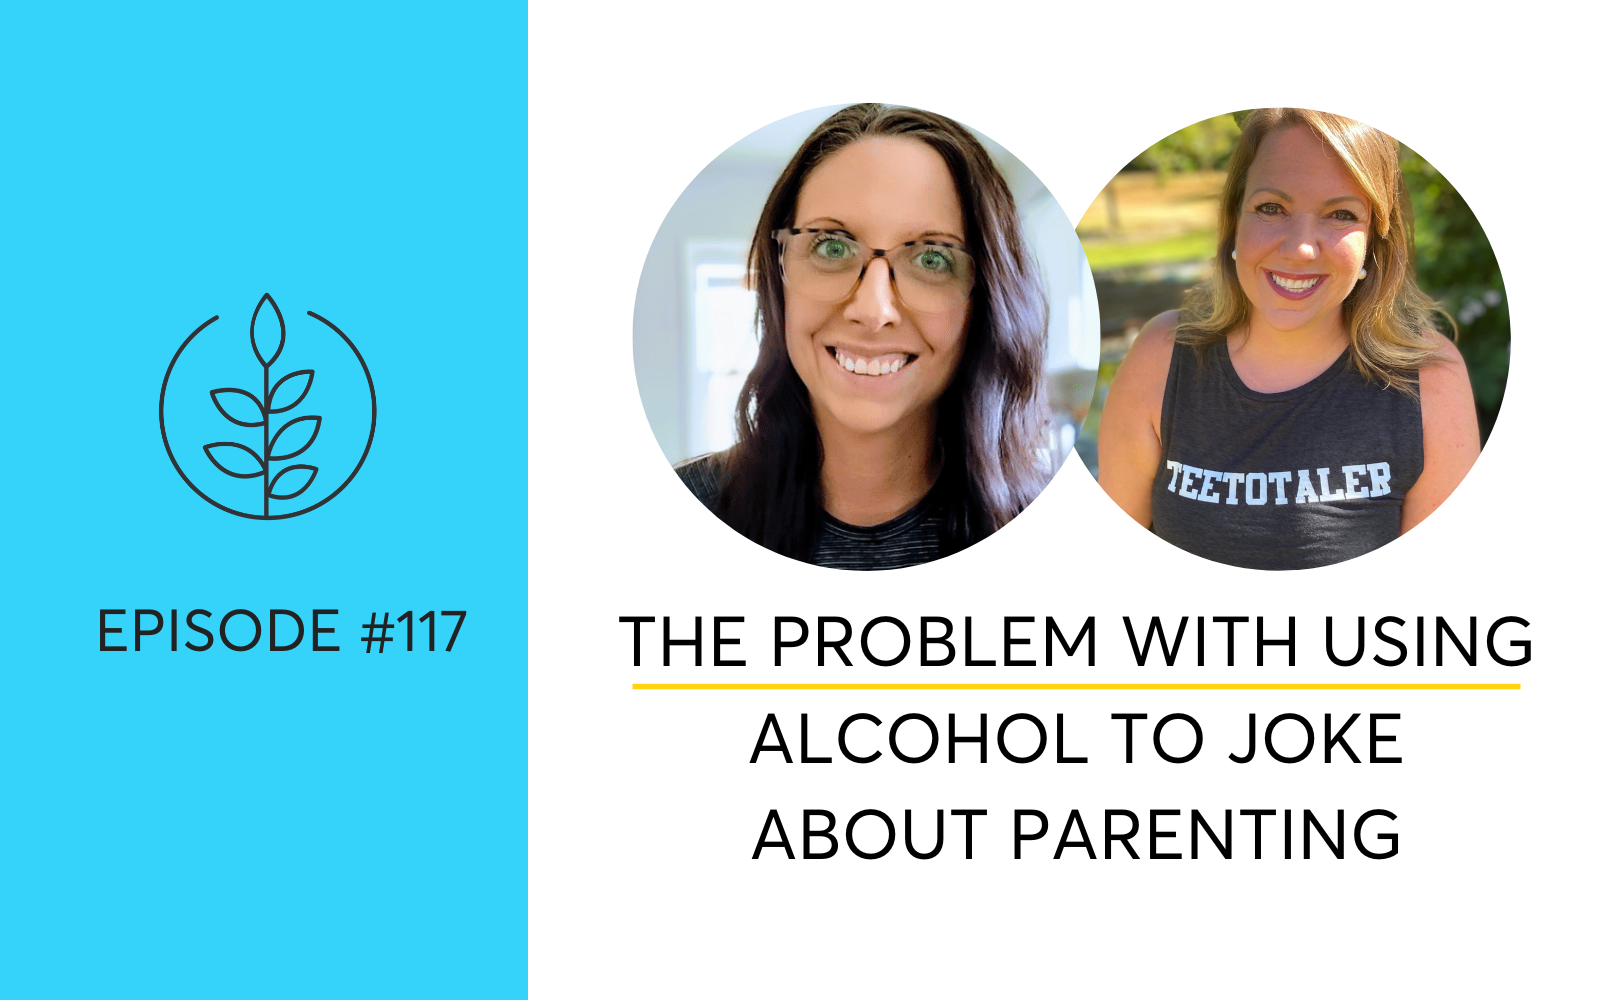 The Problem With Using Alcohol To Joke About Parenting